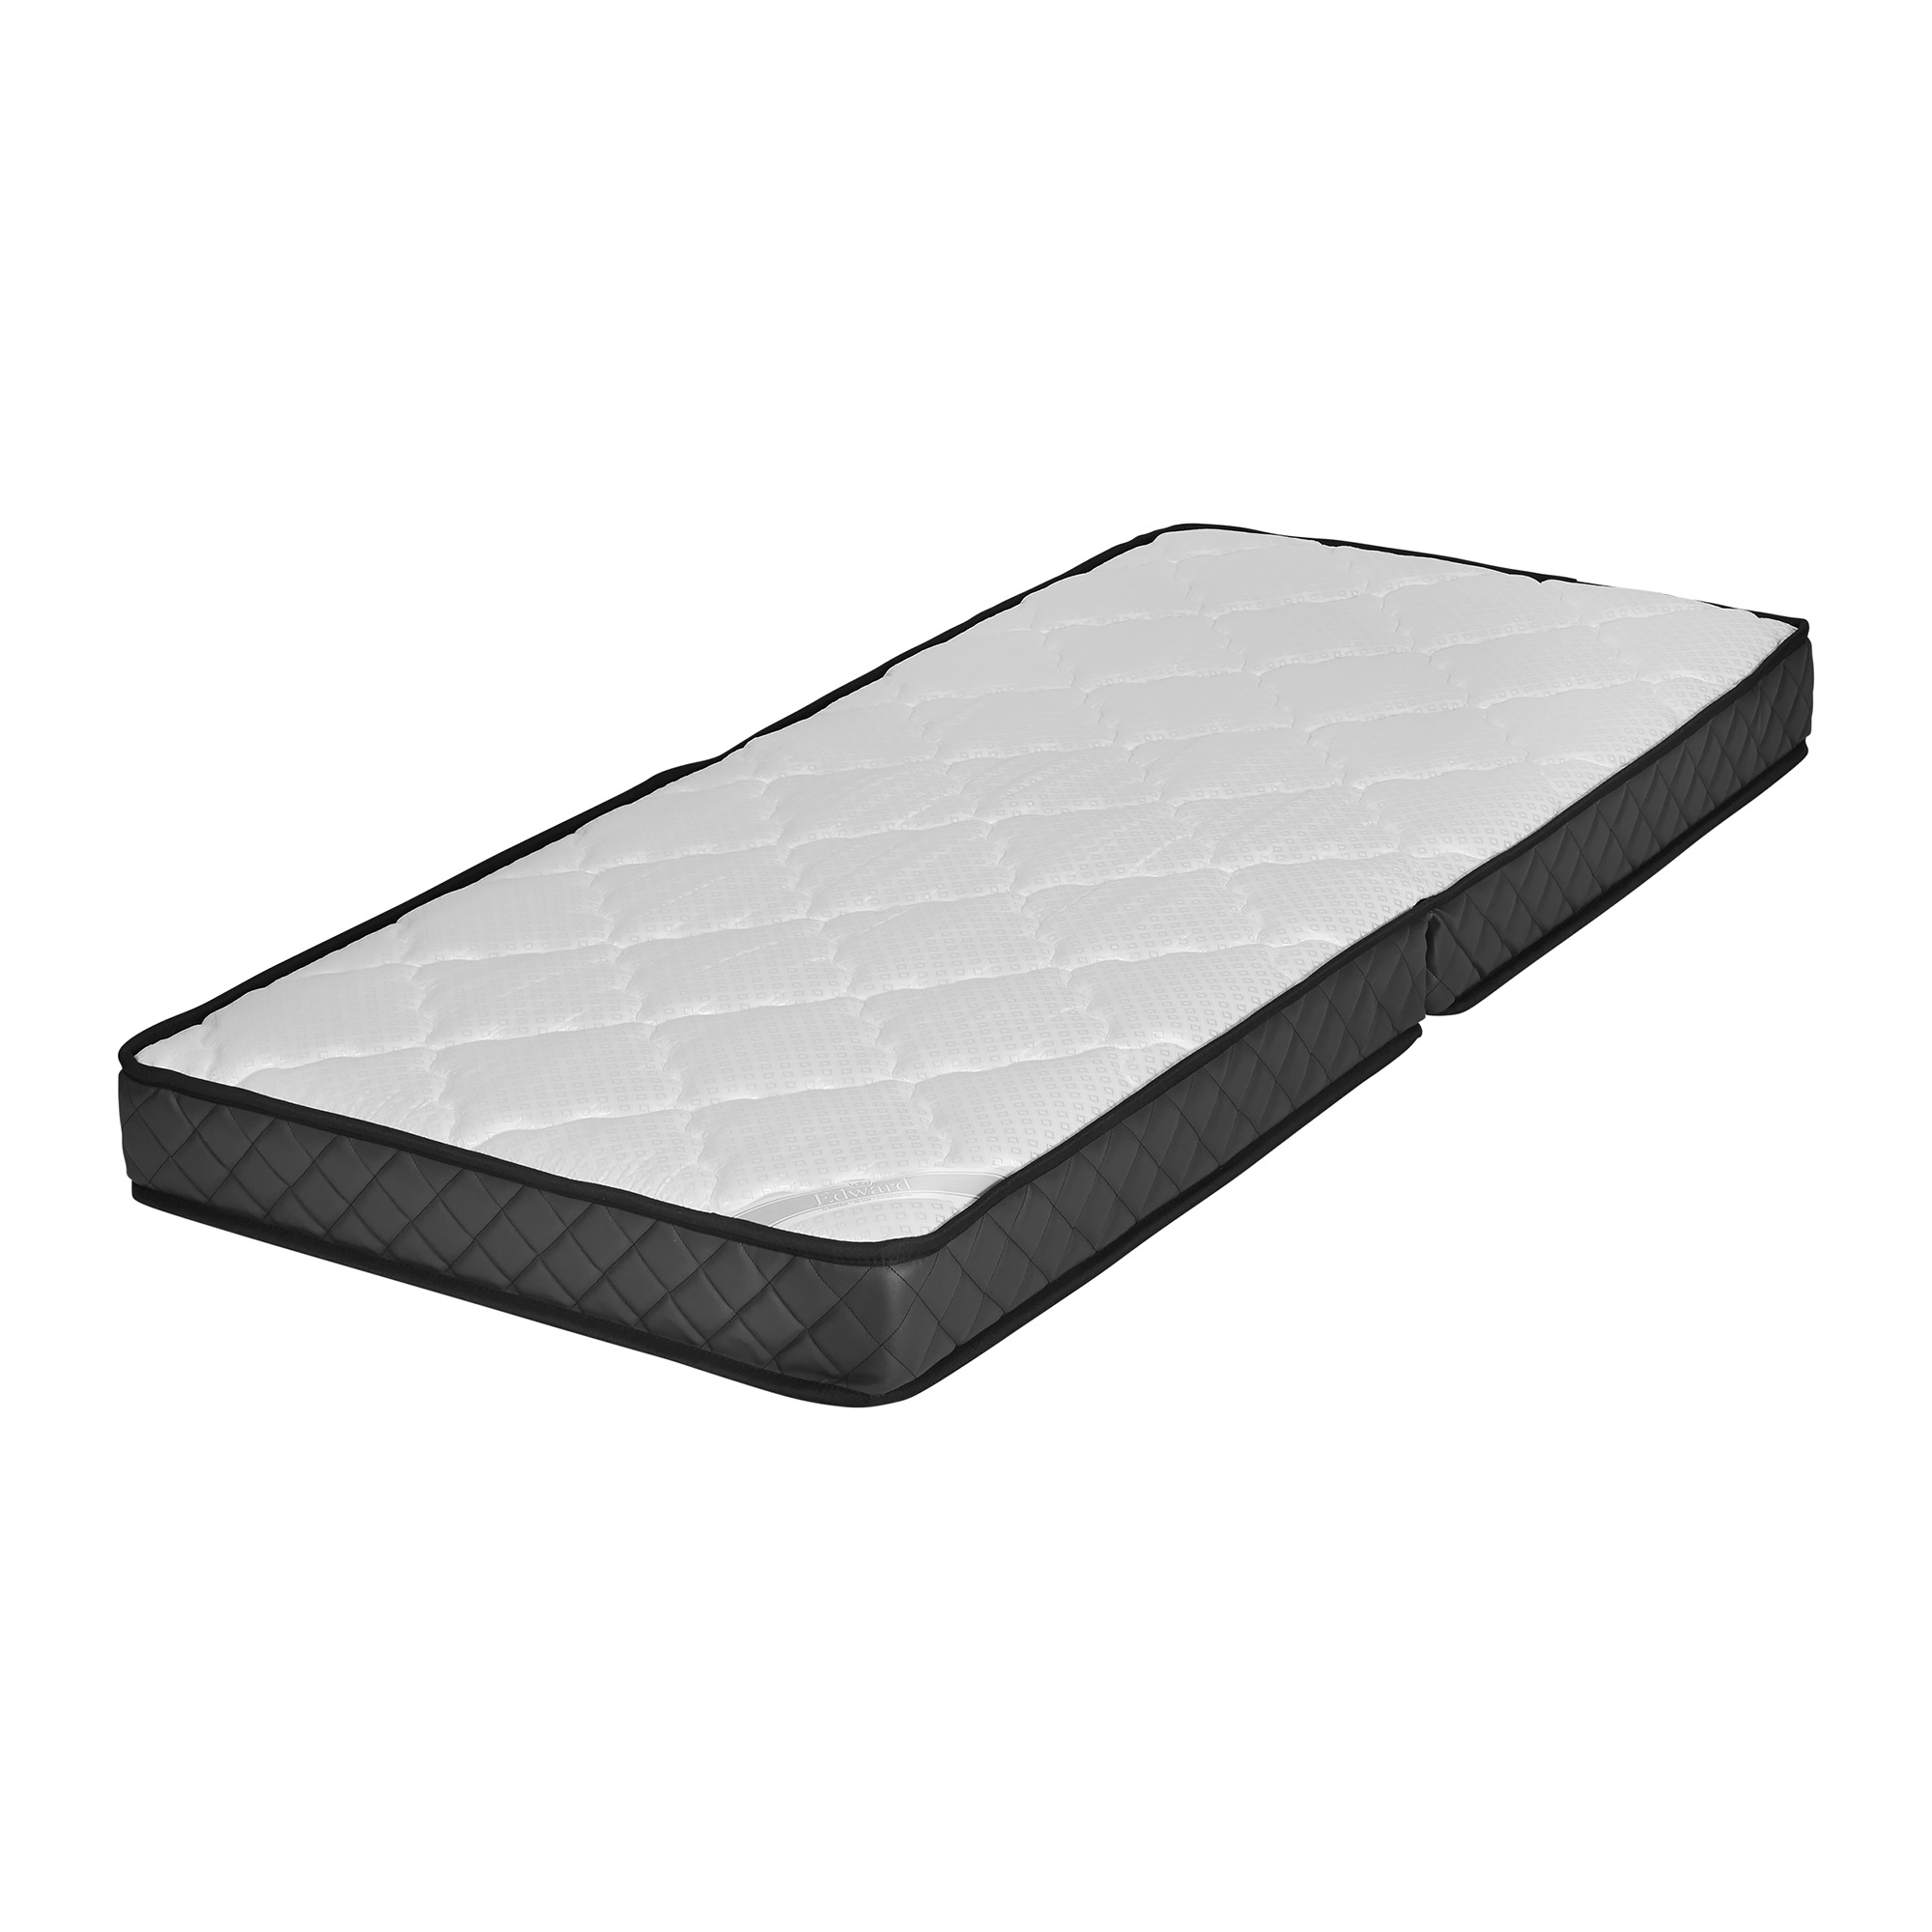 Replacement mattress for Ritz PU Leather. Extra firm. Black